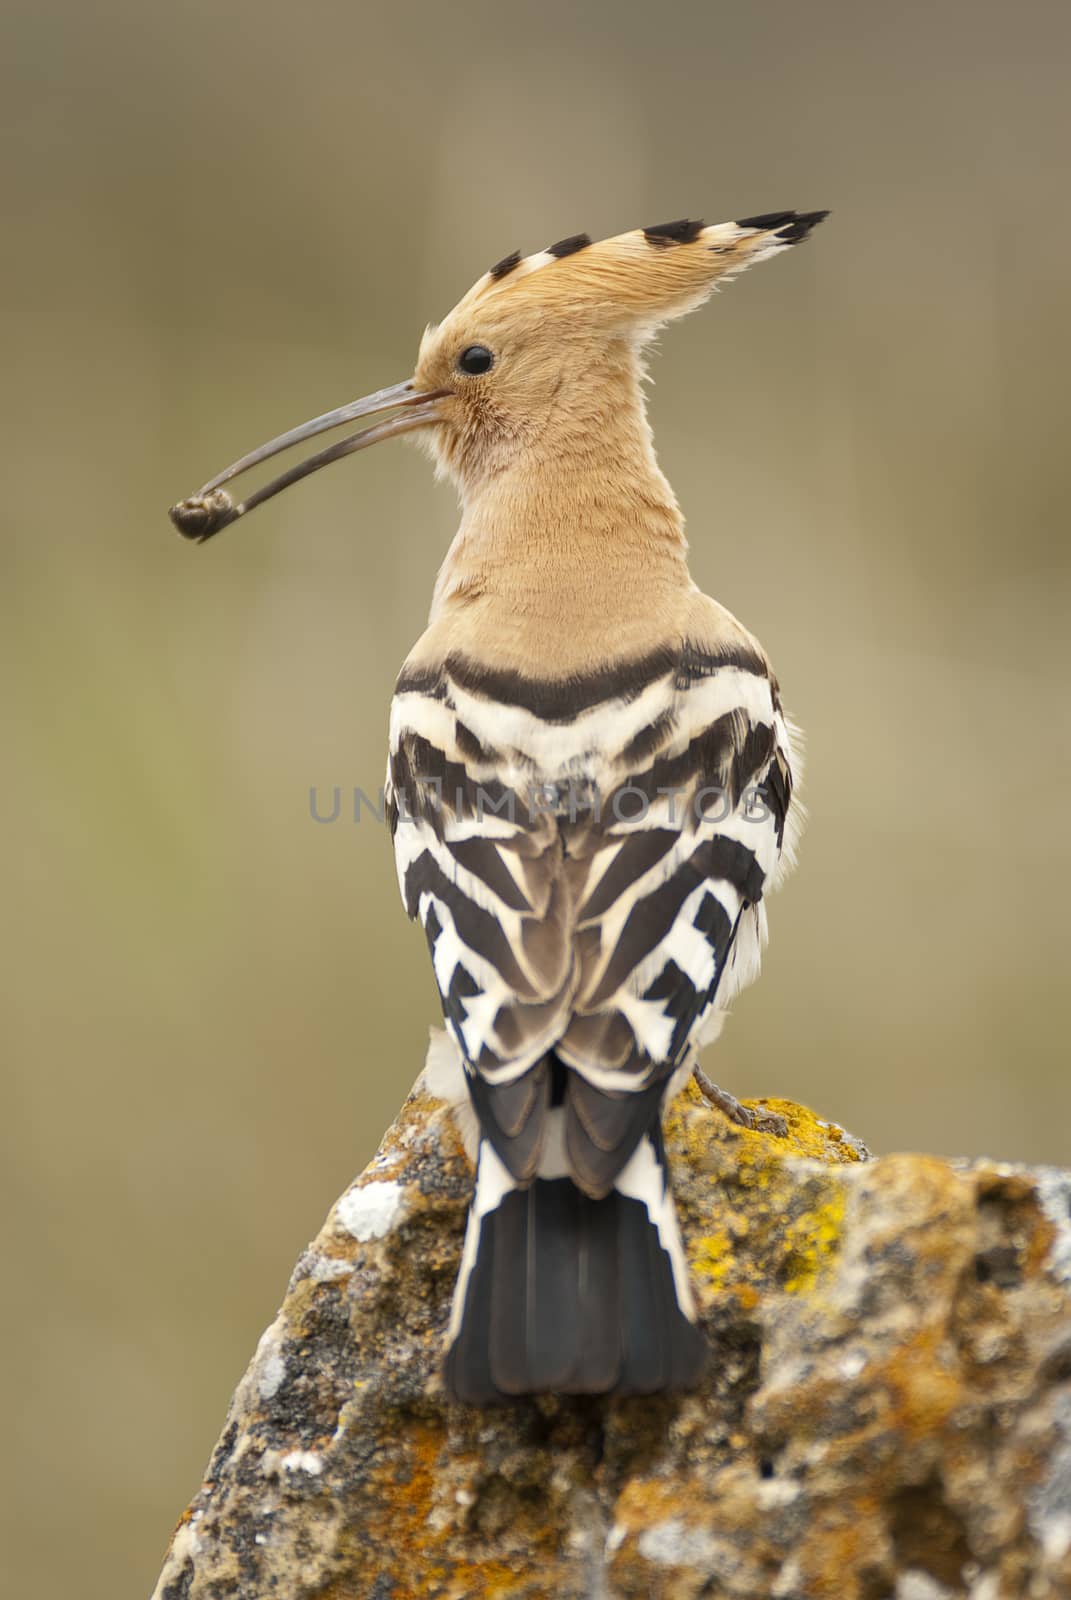 Eurasia Hoopoe or Common Hoopoe (Upupa epops), with a beetle in  by jalonsohu@gmail.com